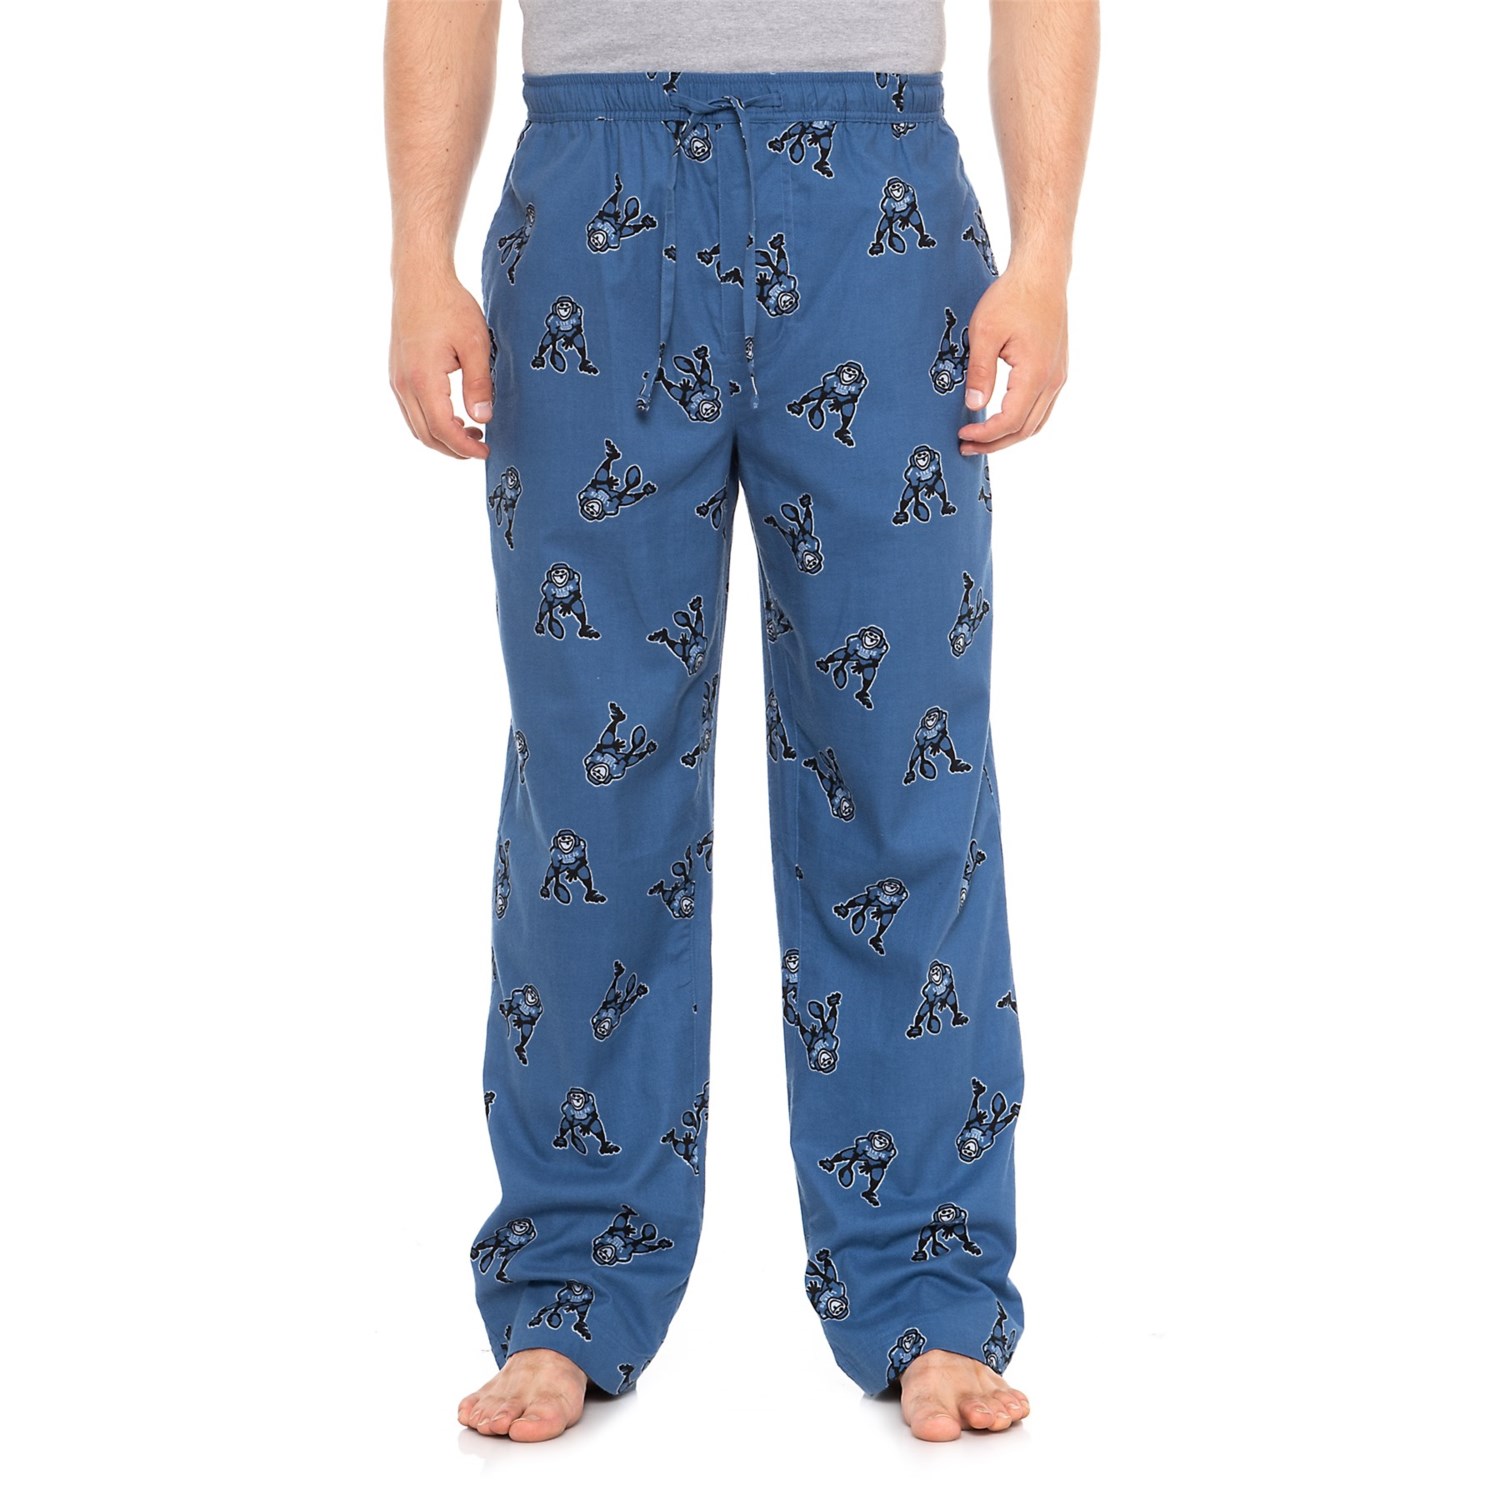 Life is good® Tossed Jake Football Classic Sleep Pants (For Men) - Save 81%